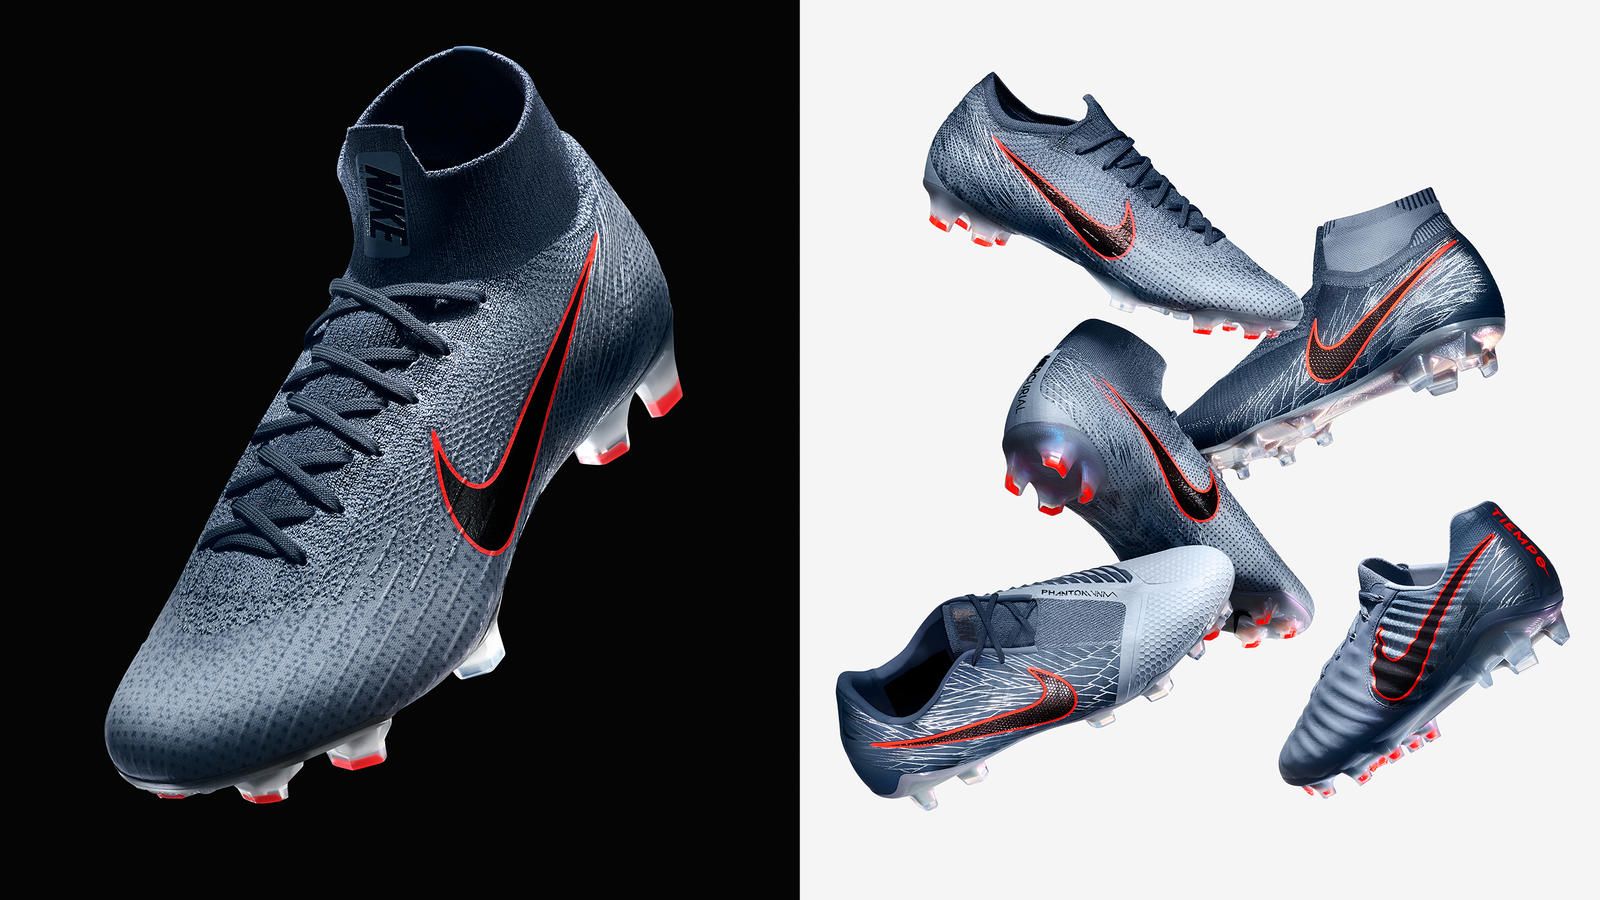 Nike 'Victory' 2019 Women's World Cup Boots Pack Launched